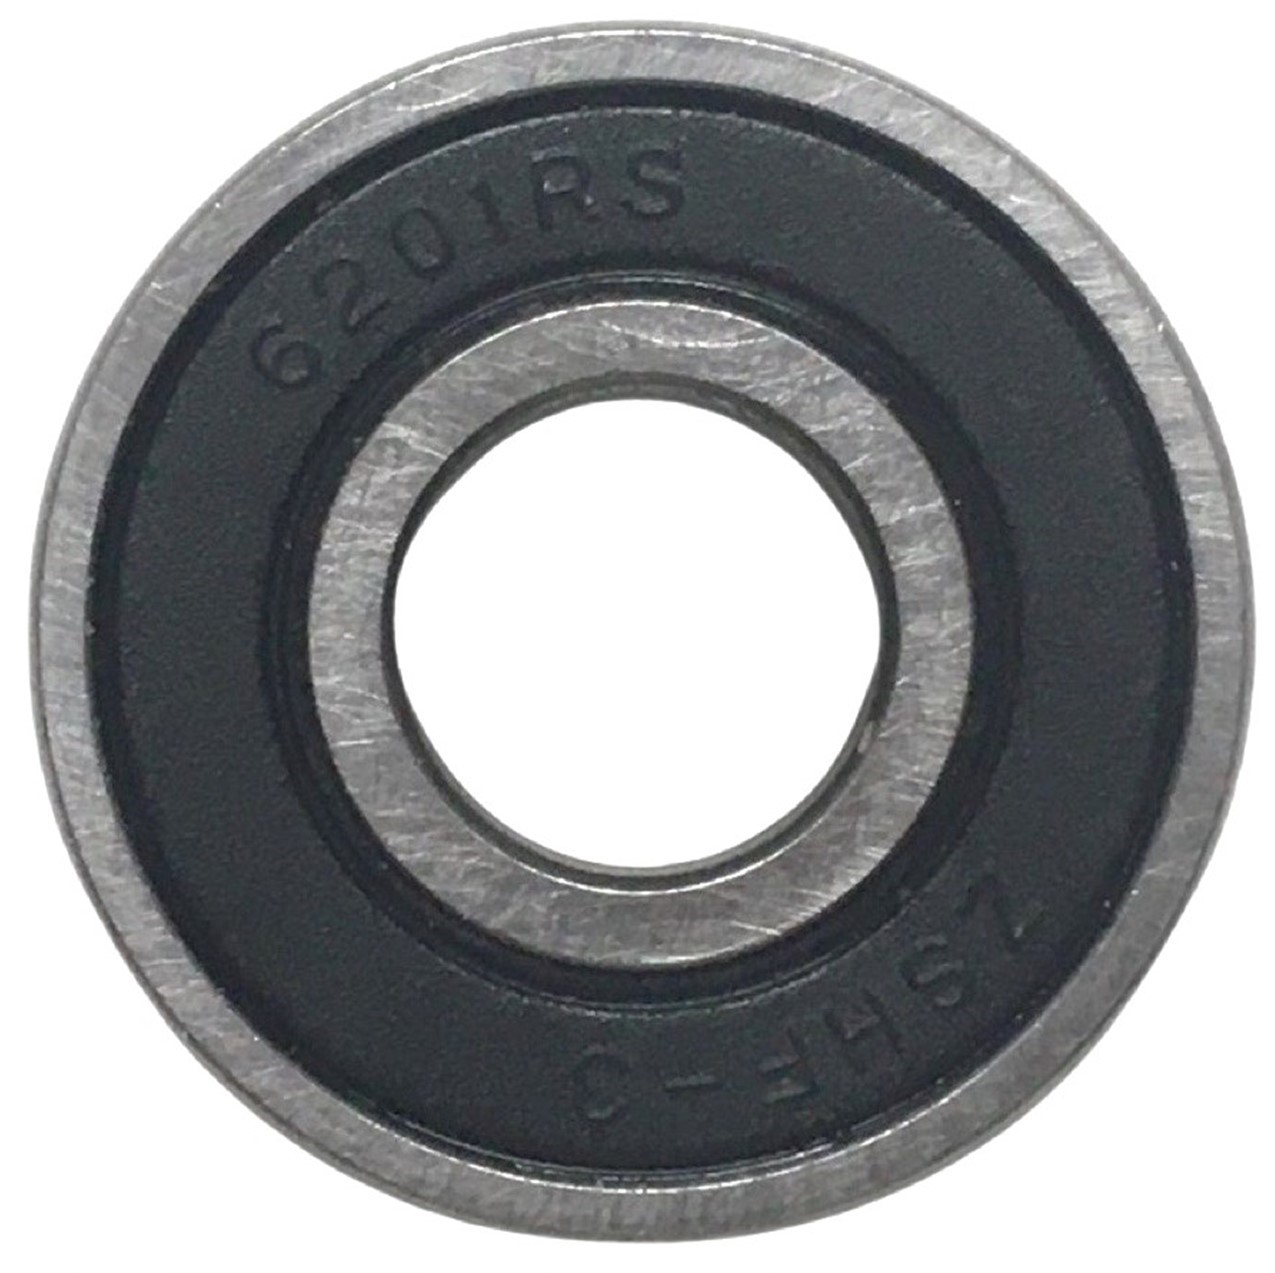 Ball Bearing 6201RS ID=12 OD=32 W=10 Sold Per Pc The rubber shield color may vary from our picture